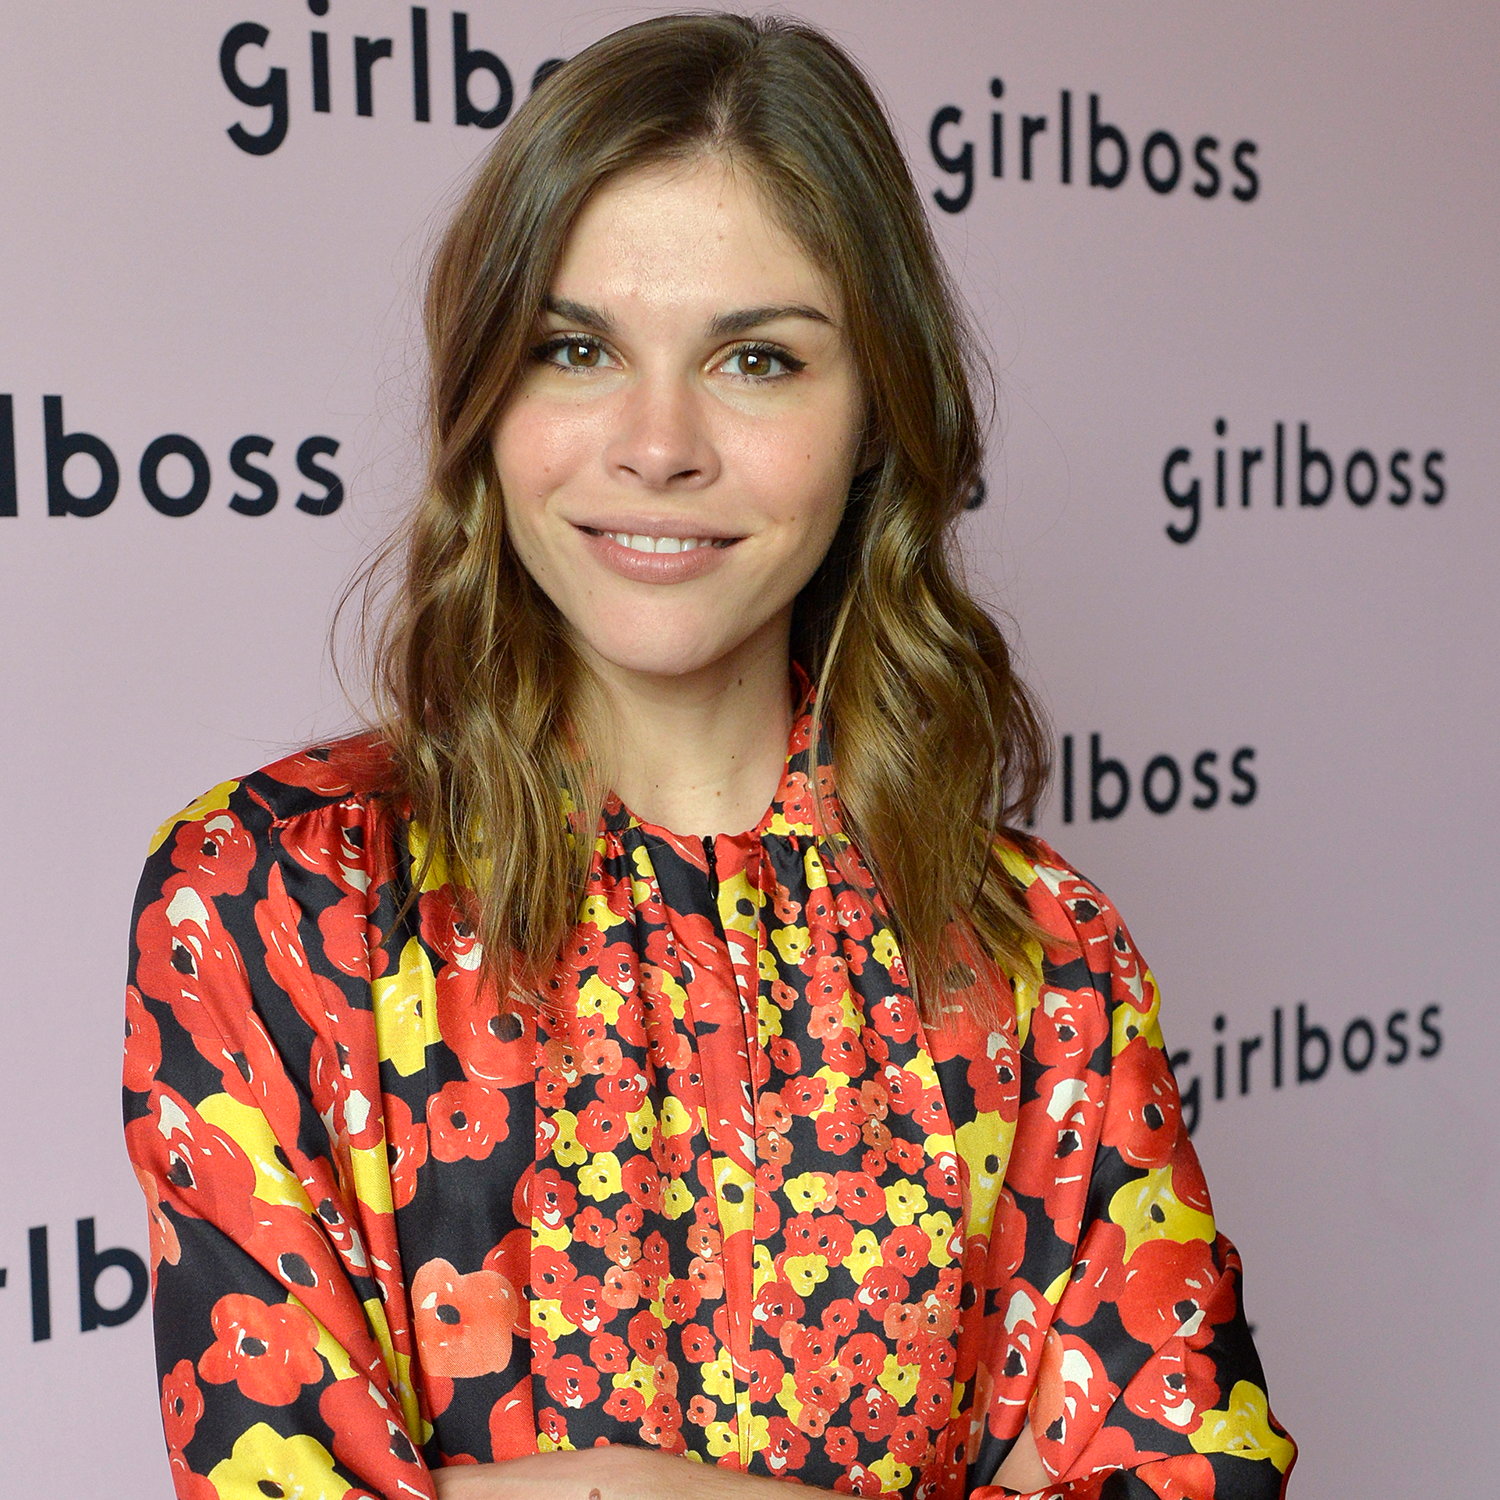 Emily Weiss, CEO of Glossier, posing at a Girlboss event